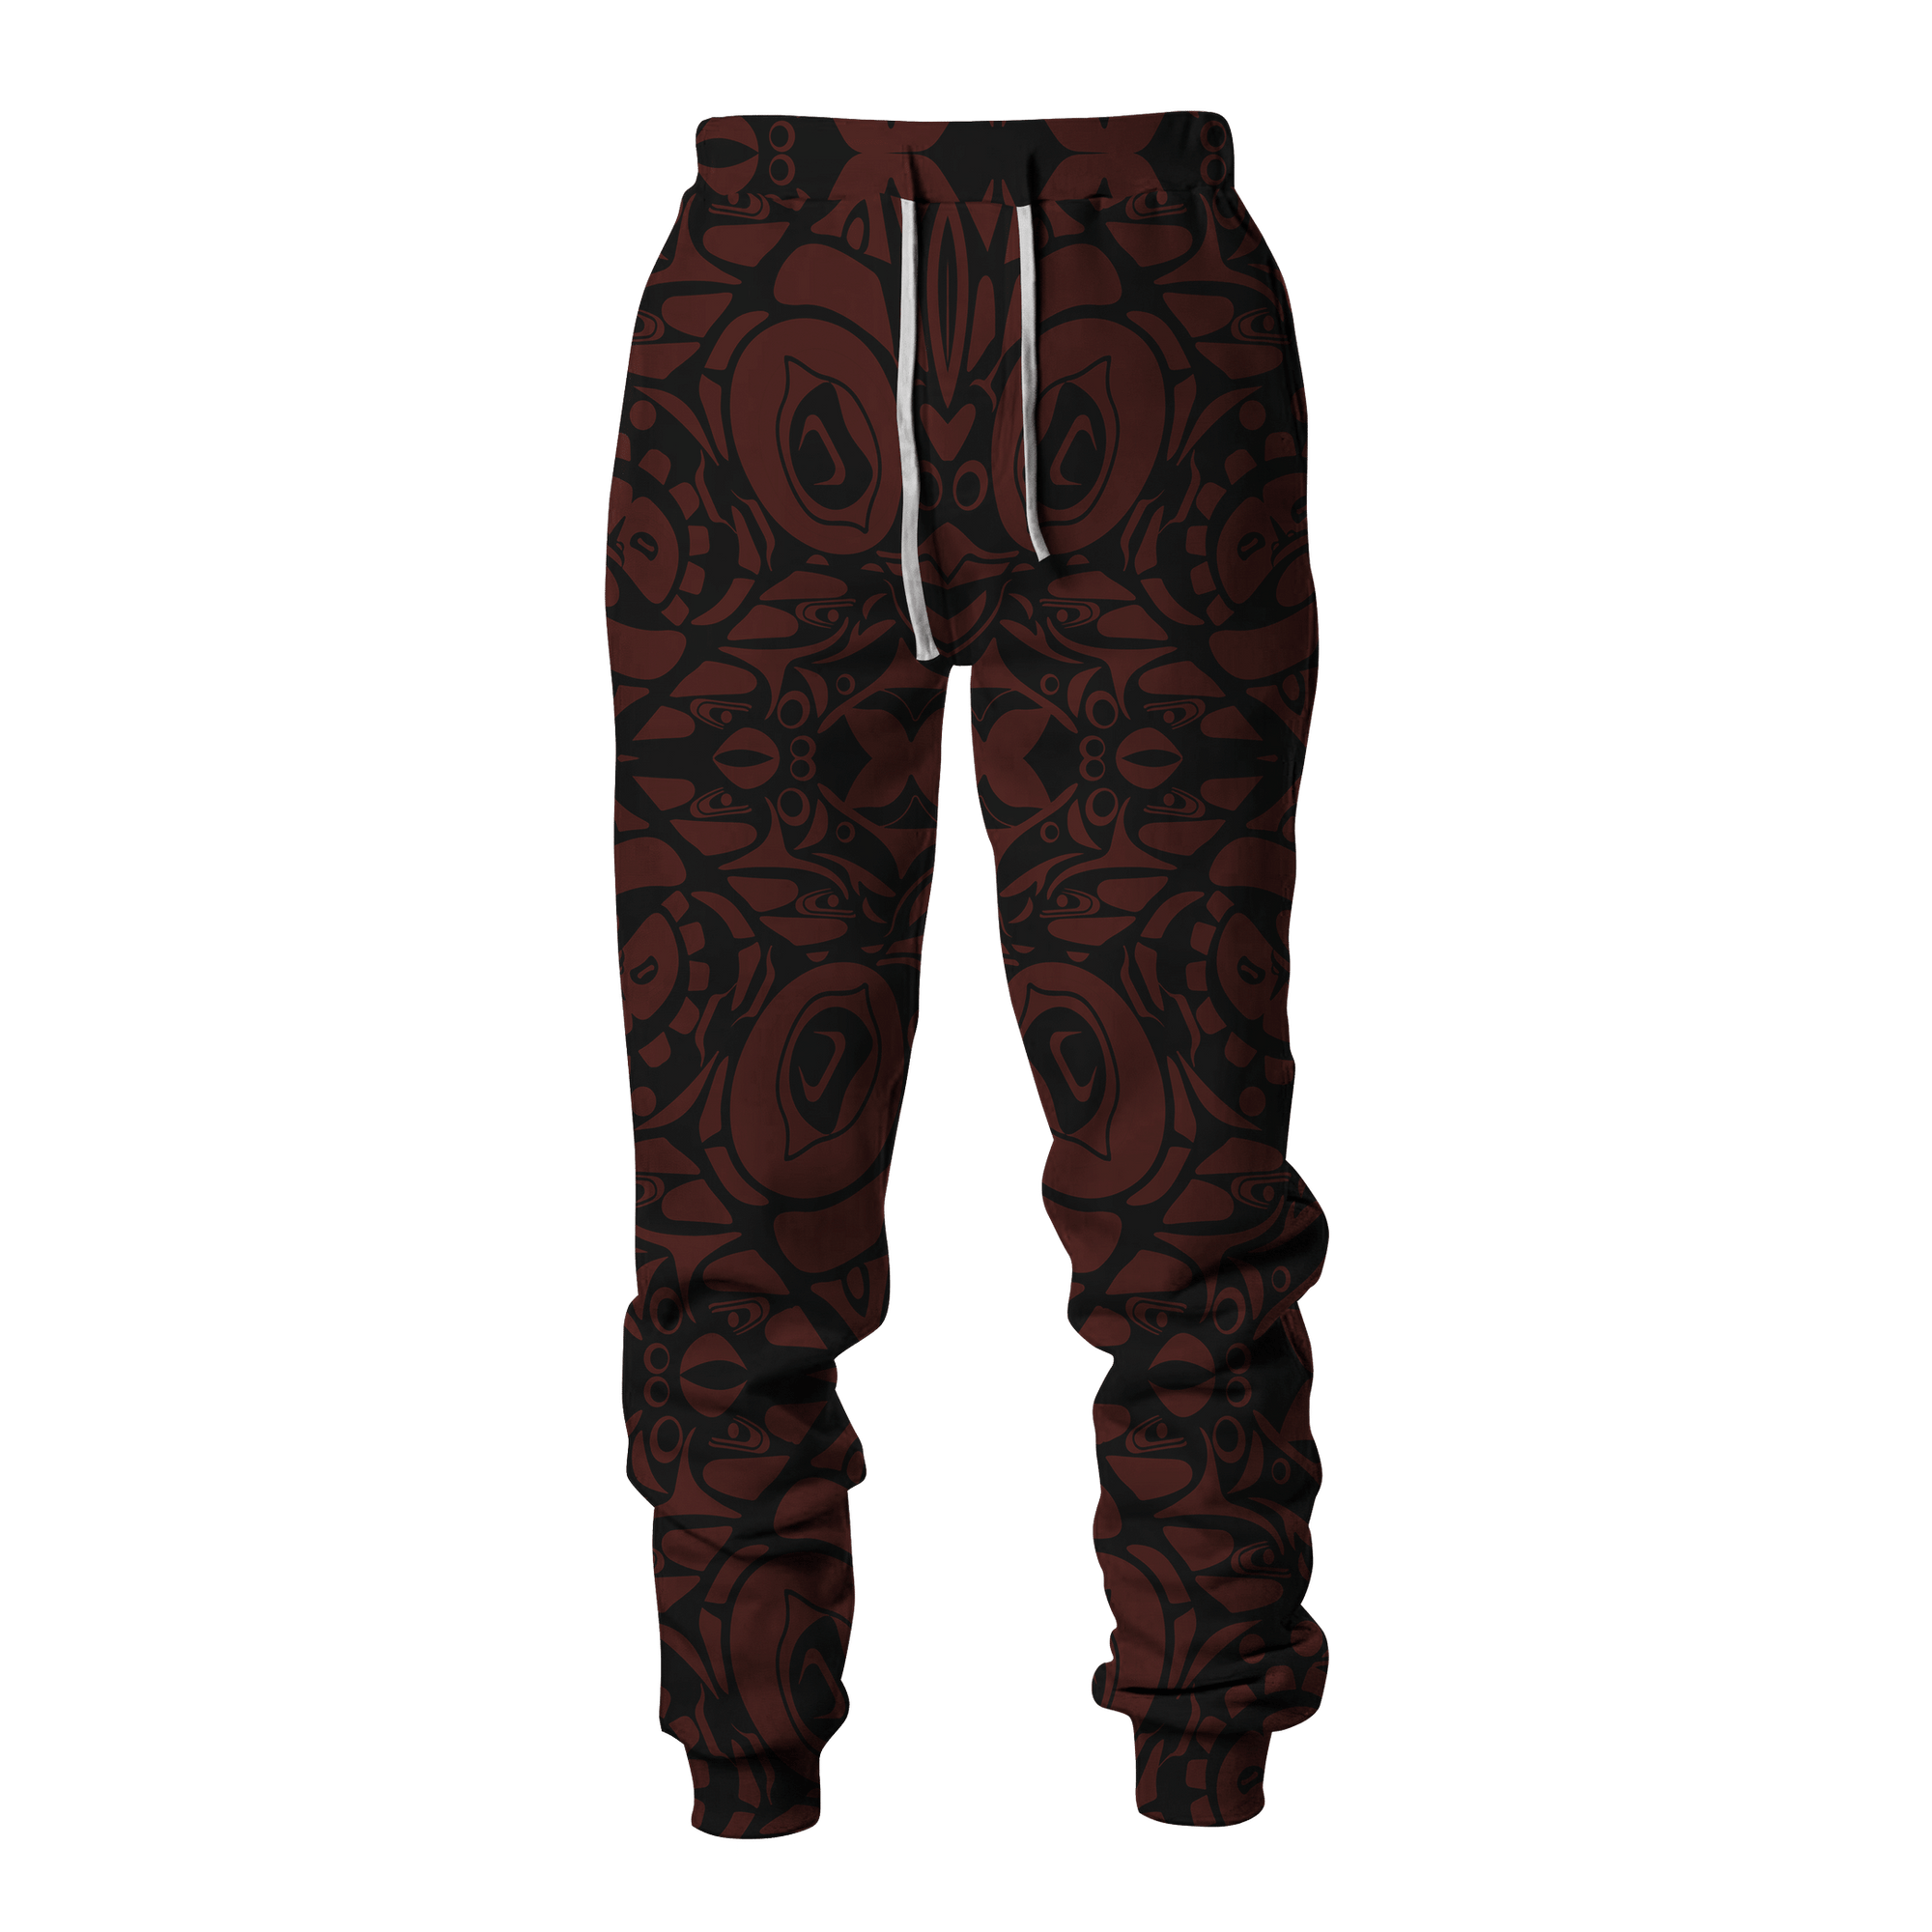 japanese-samurai-skull-eagle-owl-native-american-pacific-northwest-style-customized-all-over-printed-sweatpants